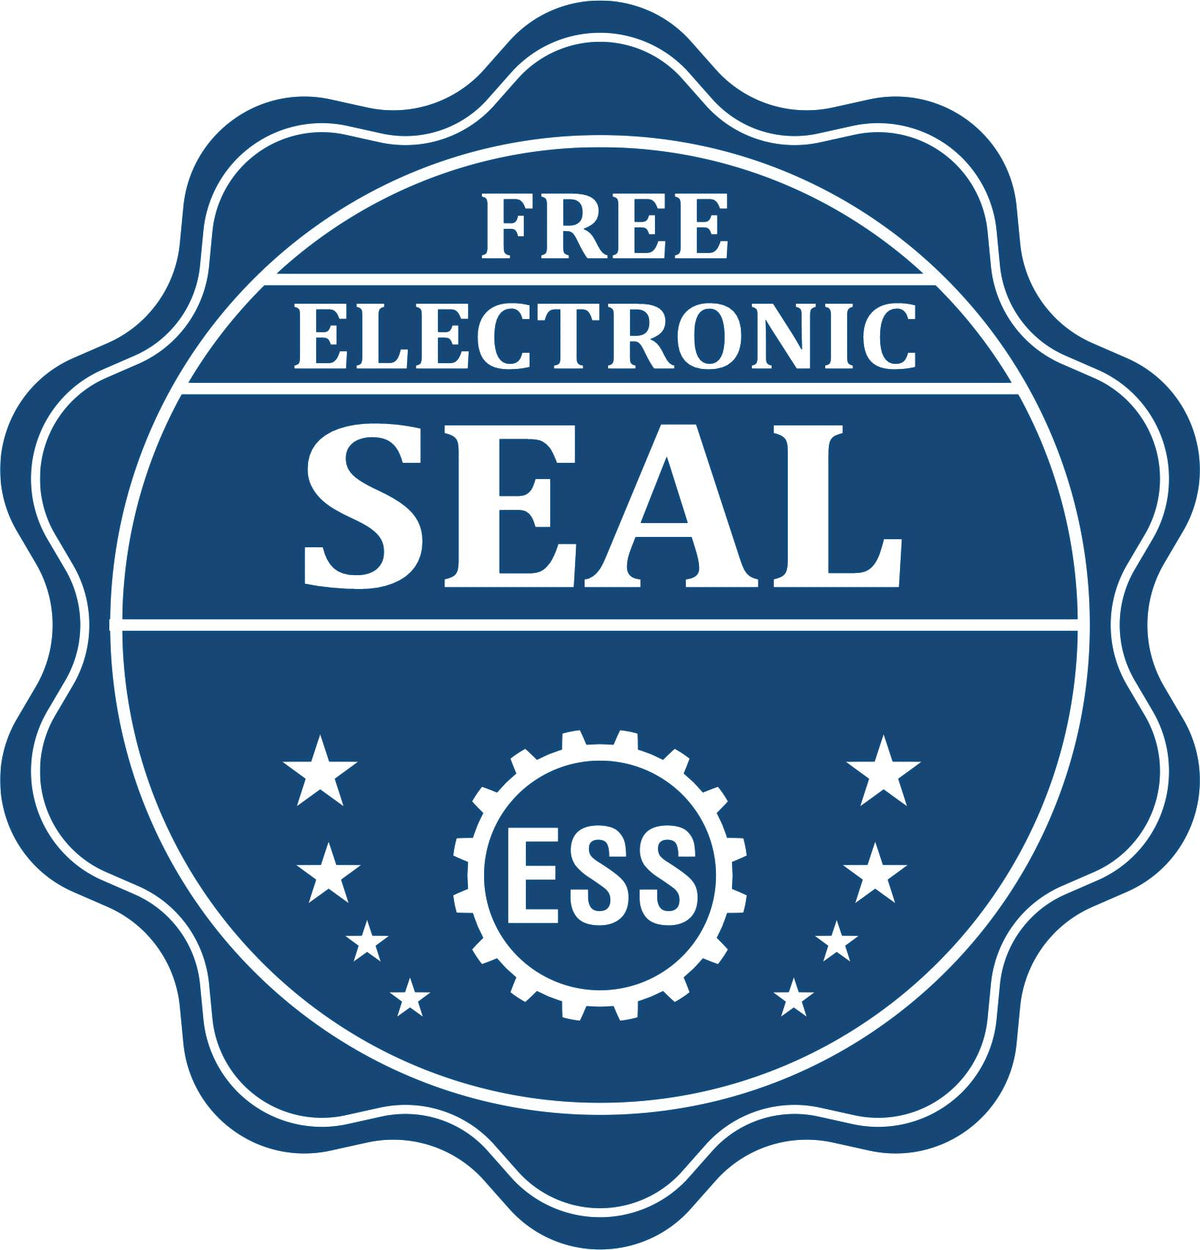 A badge showing a free electronic seal for the Alabama Desk Surveyor Seal Embosser with stars and the ESS gear on the emblem.